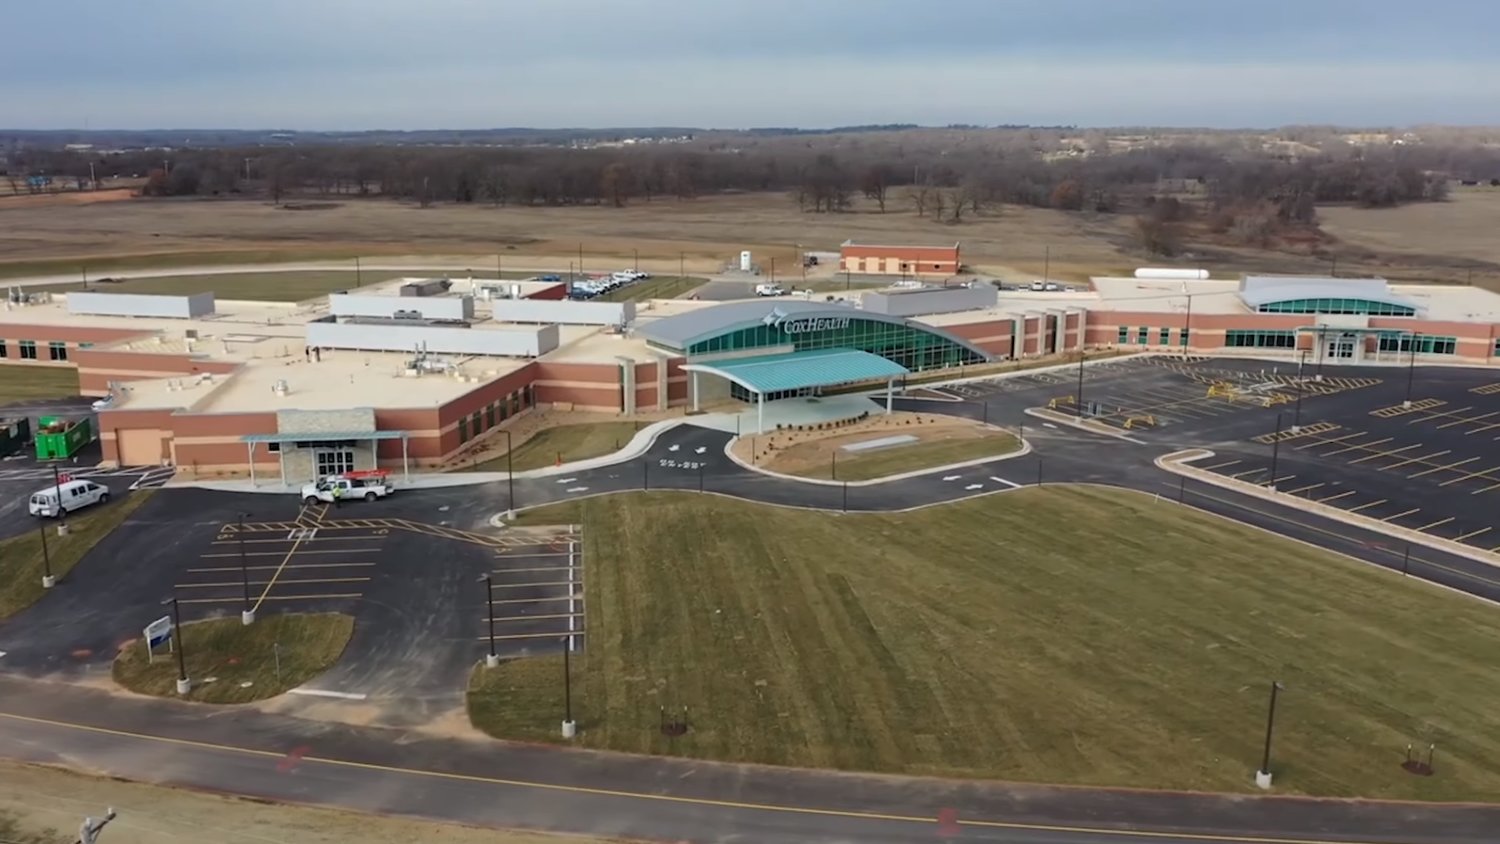 The 102,000-square-foot center was built by J.E. Dunn Construction Group.